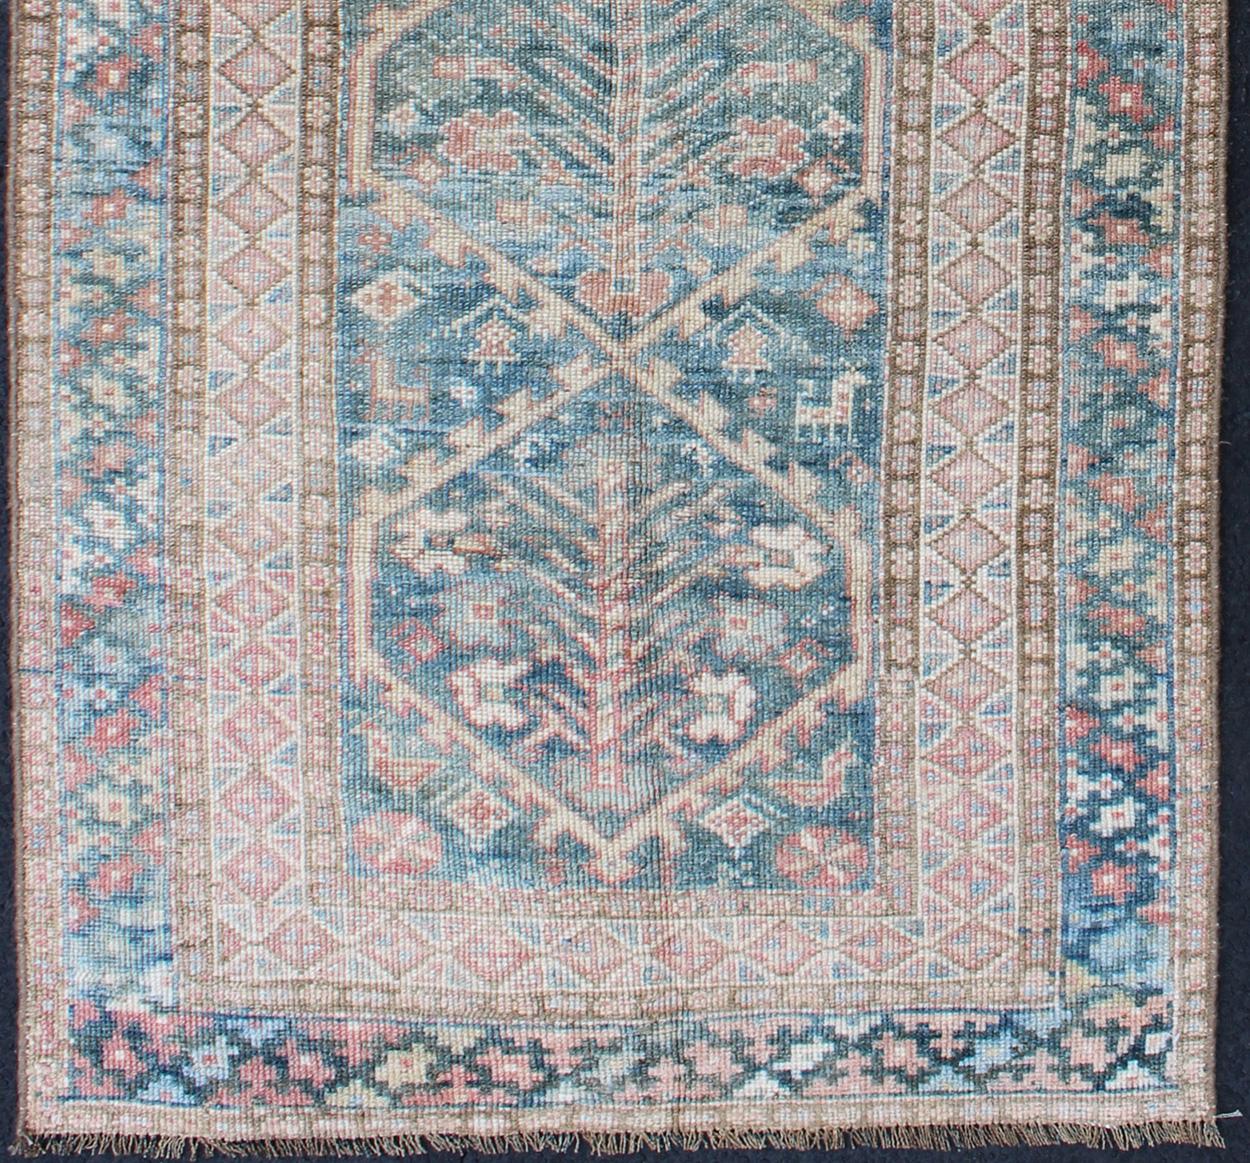 Malayer Antique Geometric Design Persian Small Lori Rug in Light Teal and Pink For Sale